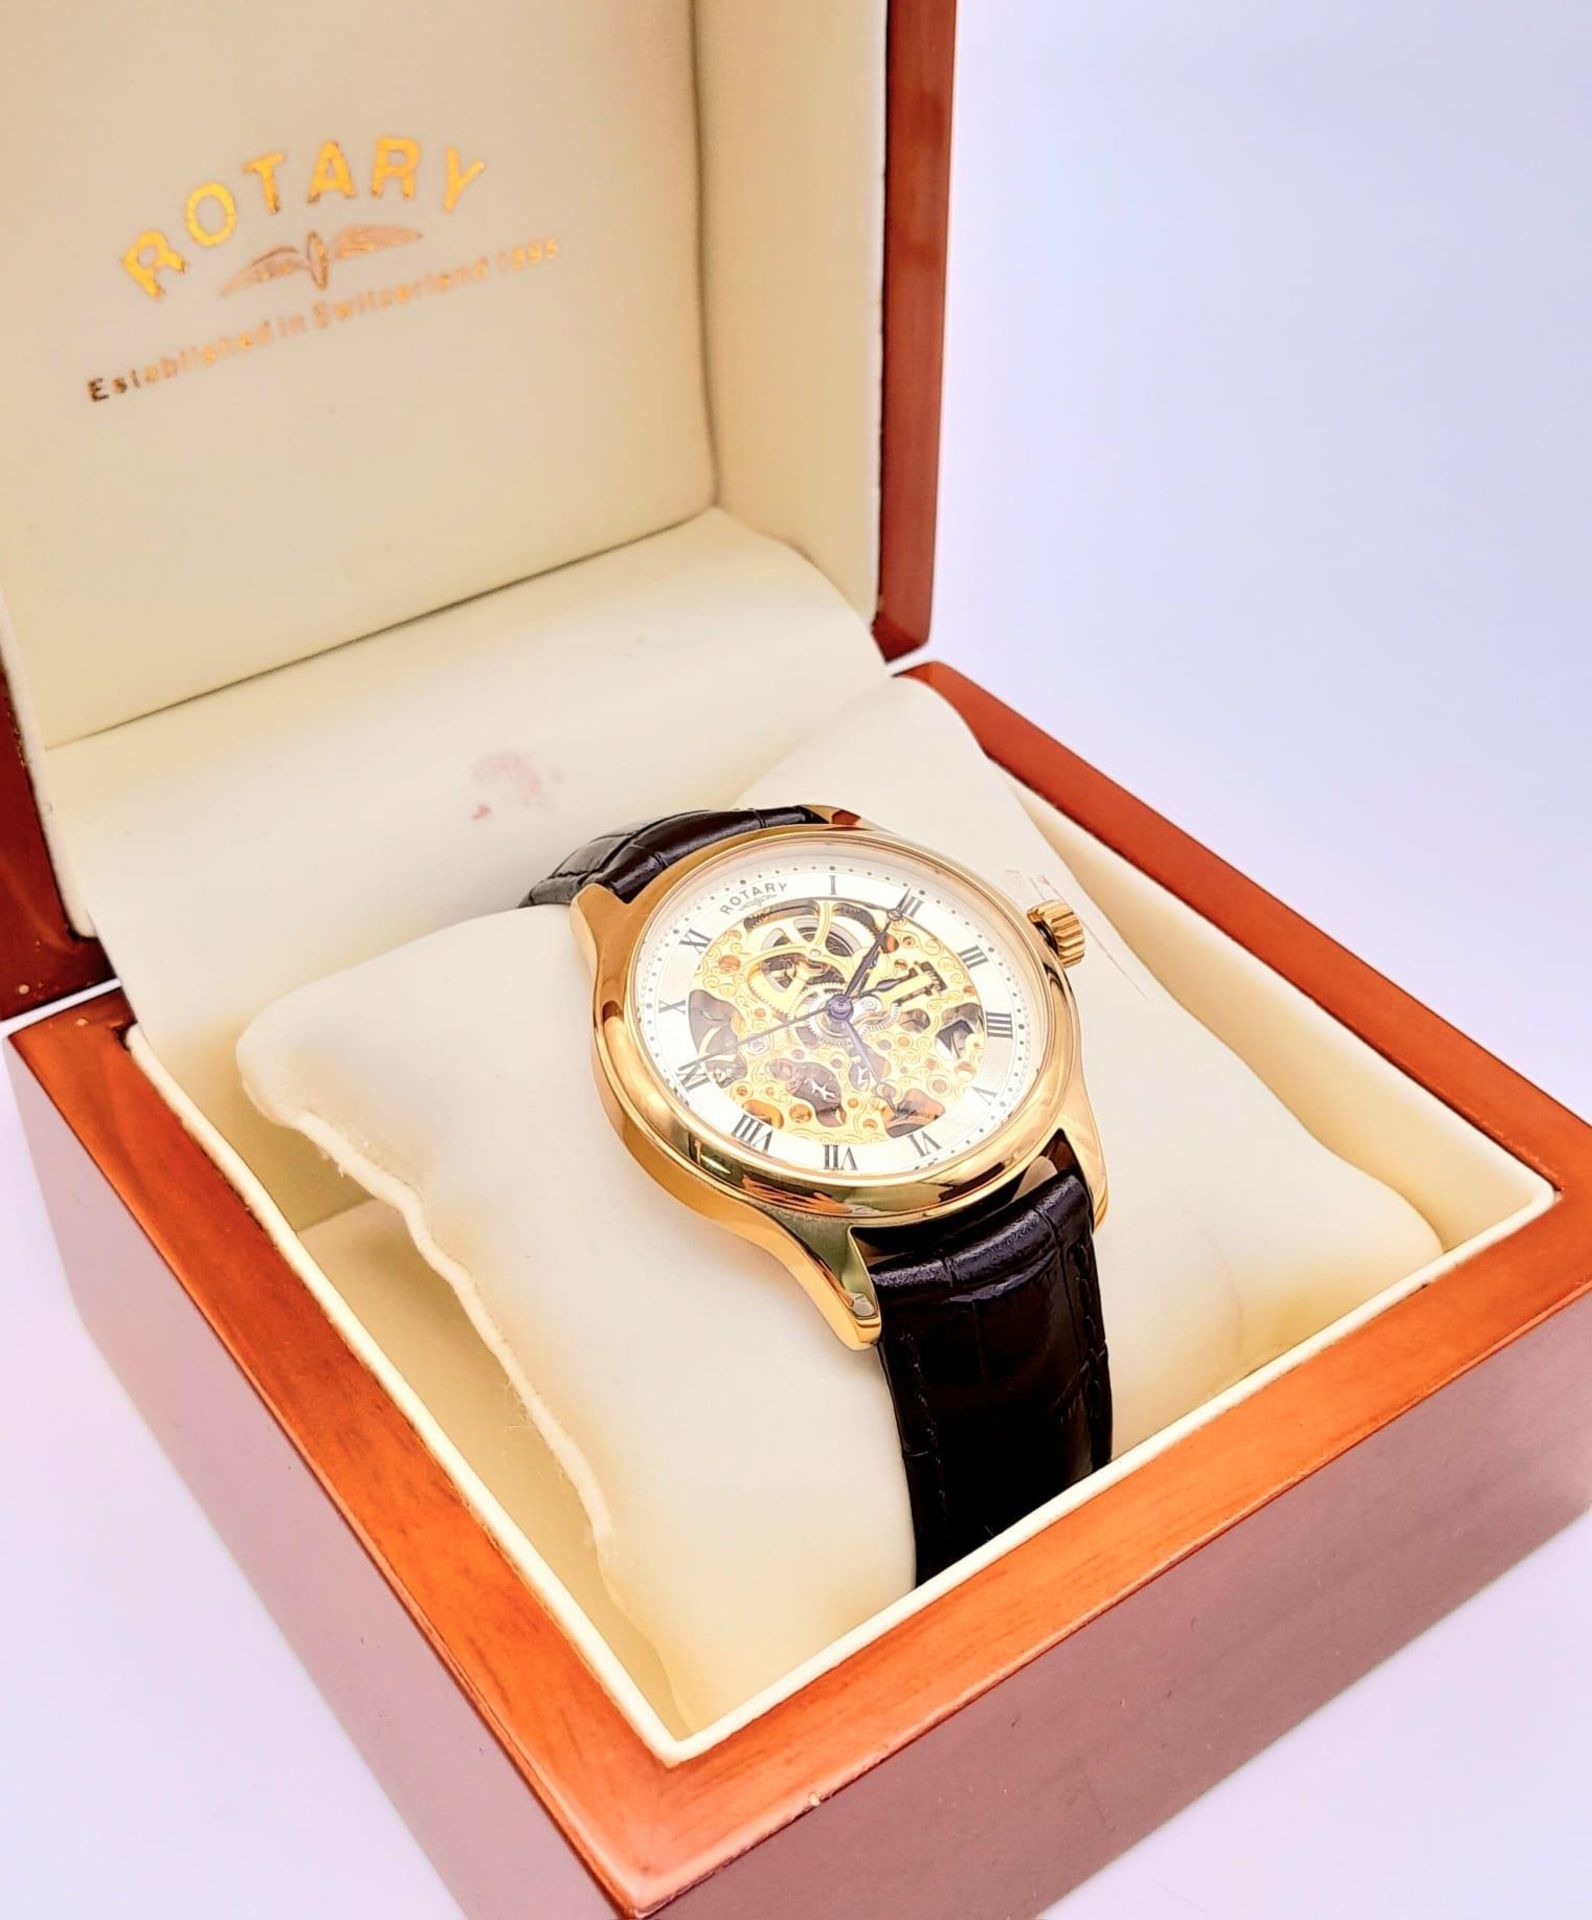 An Excellent Condition Men’s Rotary Automatic Watch Model GS02519/09- Skeleton Front and Back. - Image 6 of 12